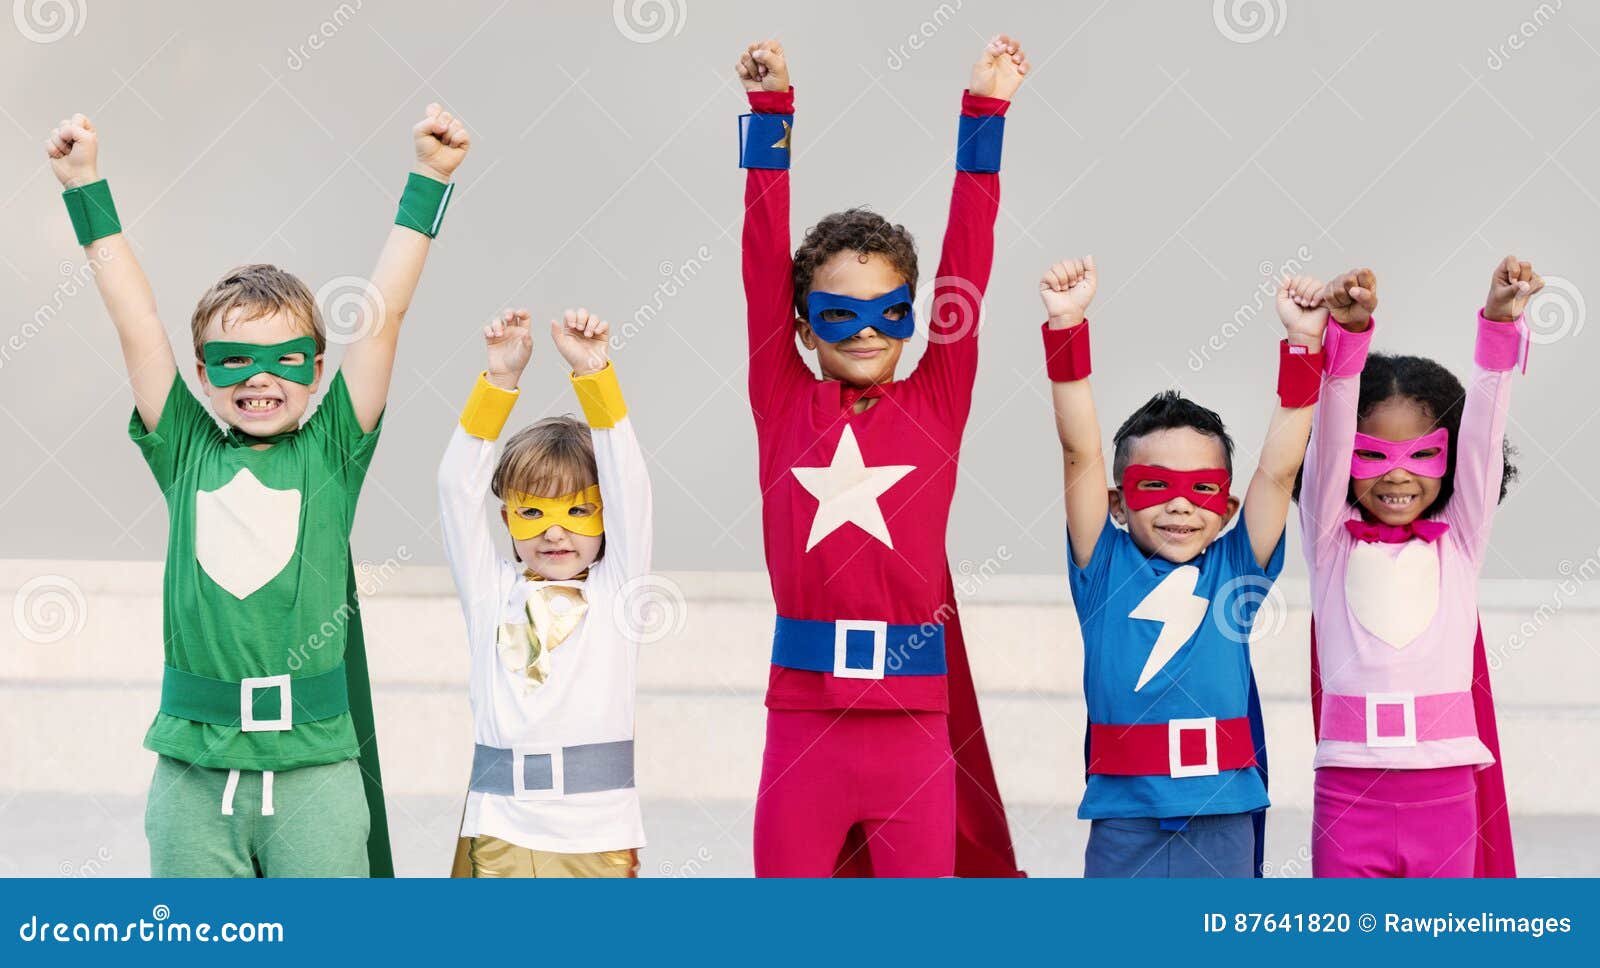 superheroes cheerful kids expressing positivity concept